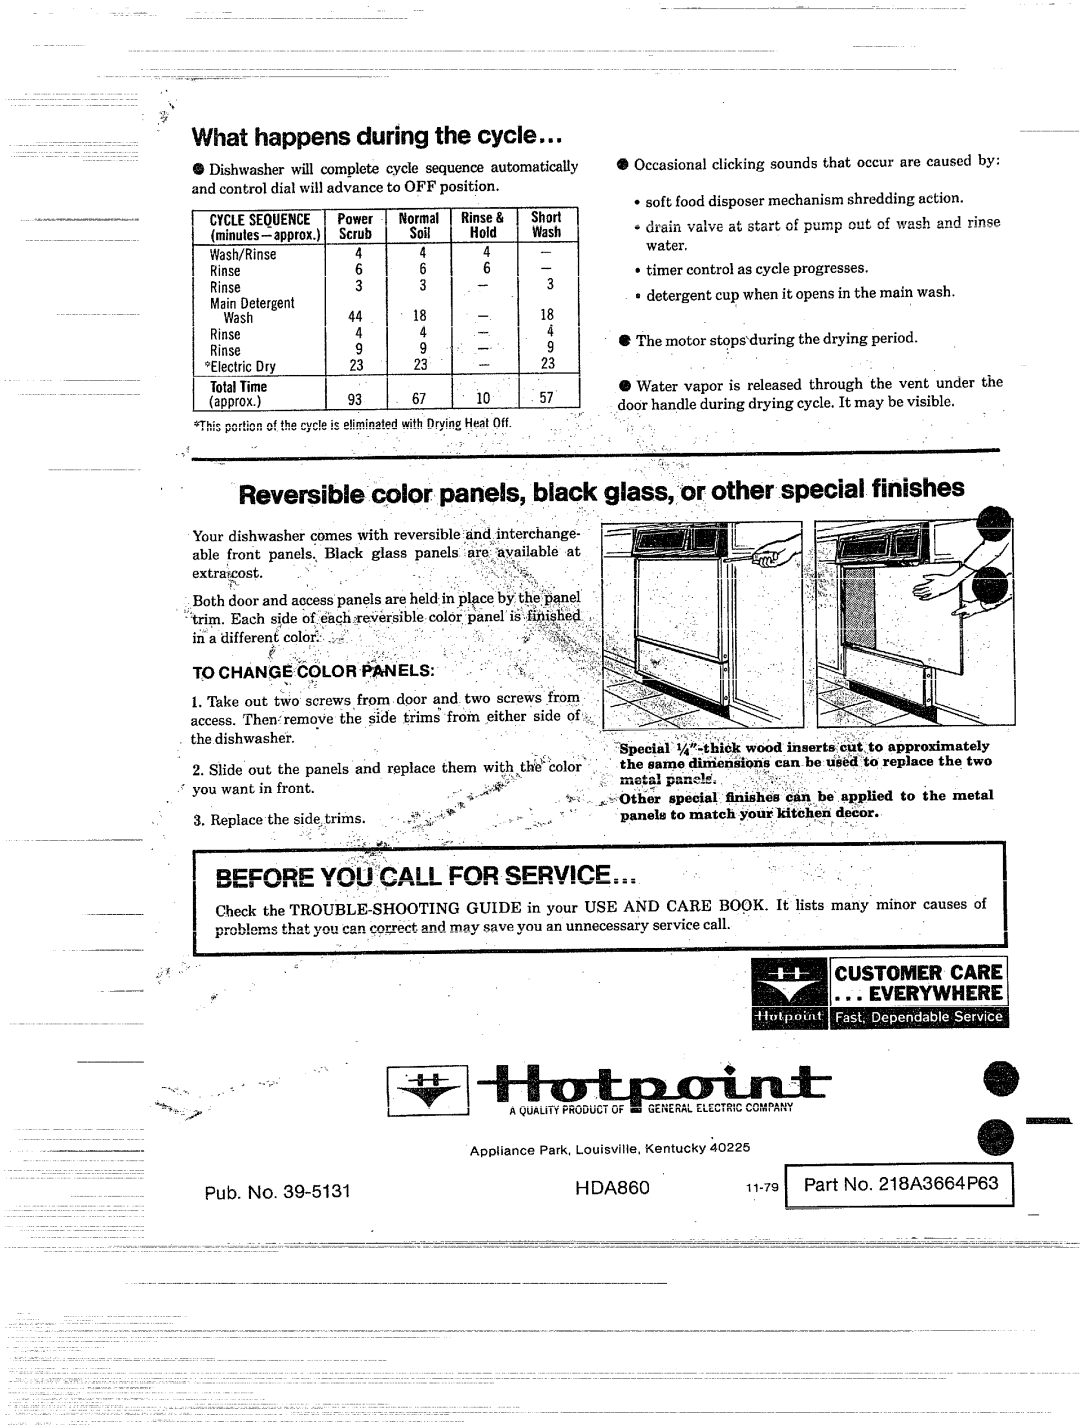 Hotpoint HDA860 aM”w~, ‘-’’-”, I BEFOREYdo-6ALLFORSERVICE, “yWhat happensduring the cycle, Customercare, Wash/Rinse, A“Els 